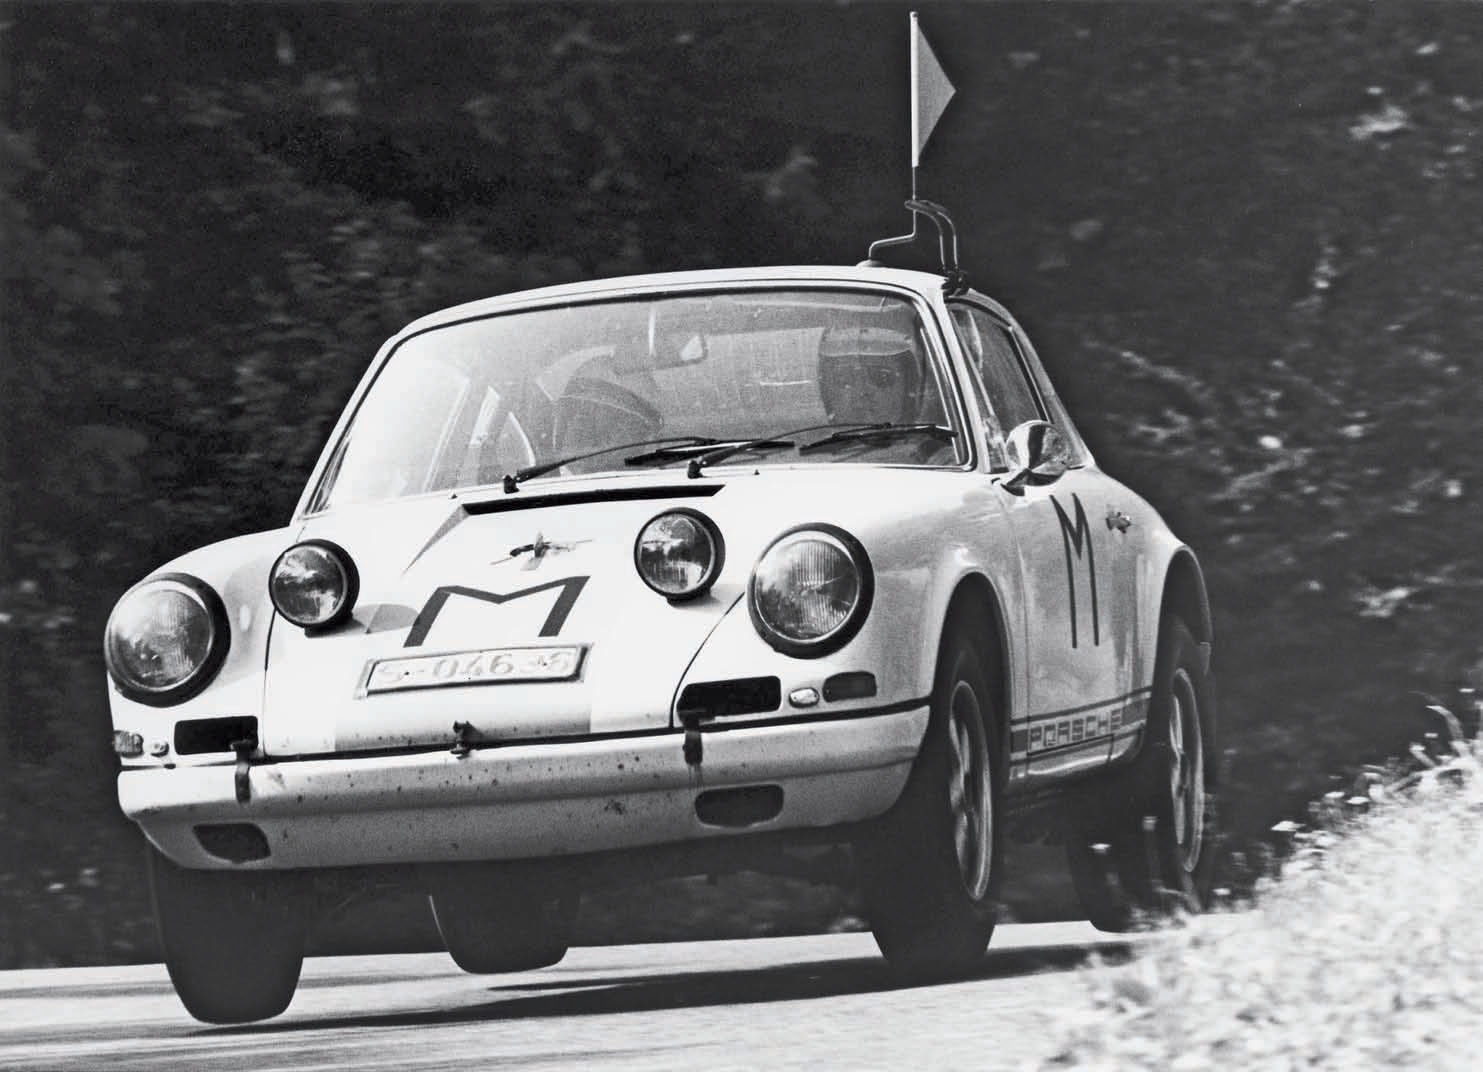 Porsche provided a 911R for Nurburgring medical crews to use during the 1,000-kilometer race. With its four tires off the ground, it’s likely the M-car driver was Porsche racer and test driver Herbert Linge. Porsche Archiv